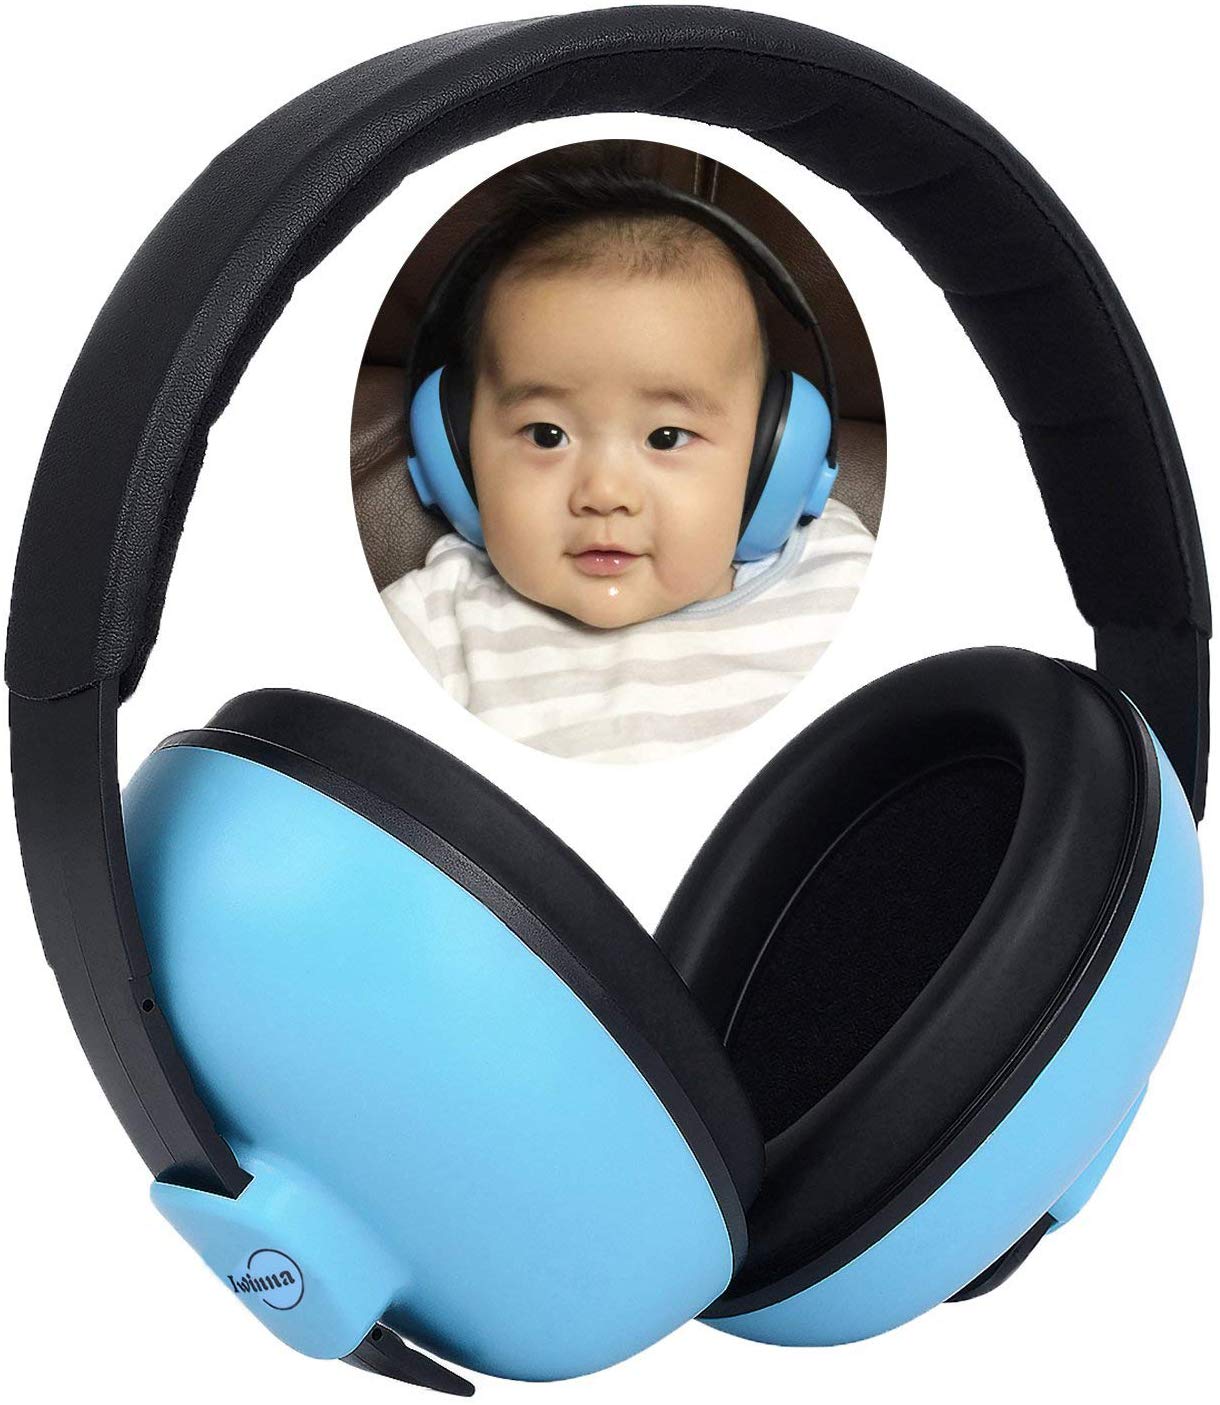 Kids Baby Safety Sound Ear Muffs Hearing Protection Noise Cancel Reduction 26Db 